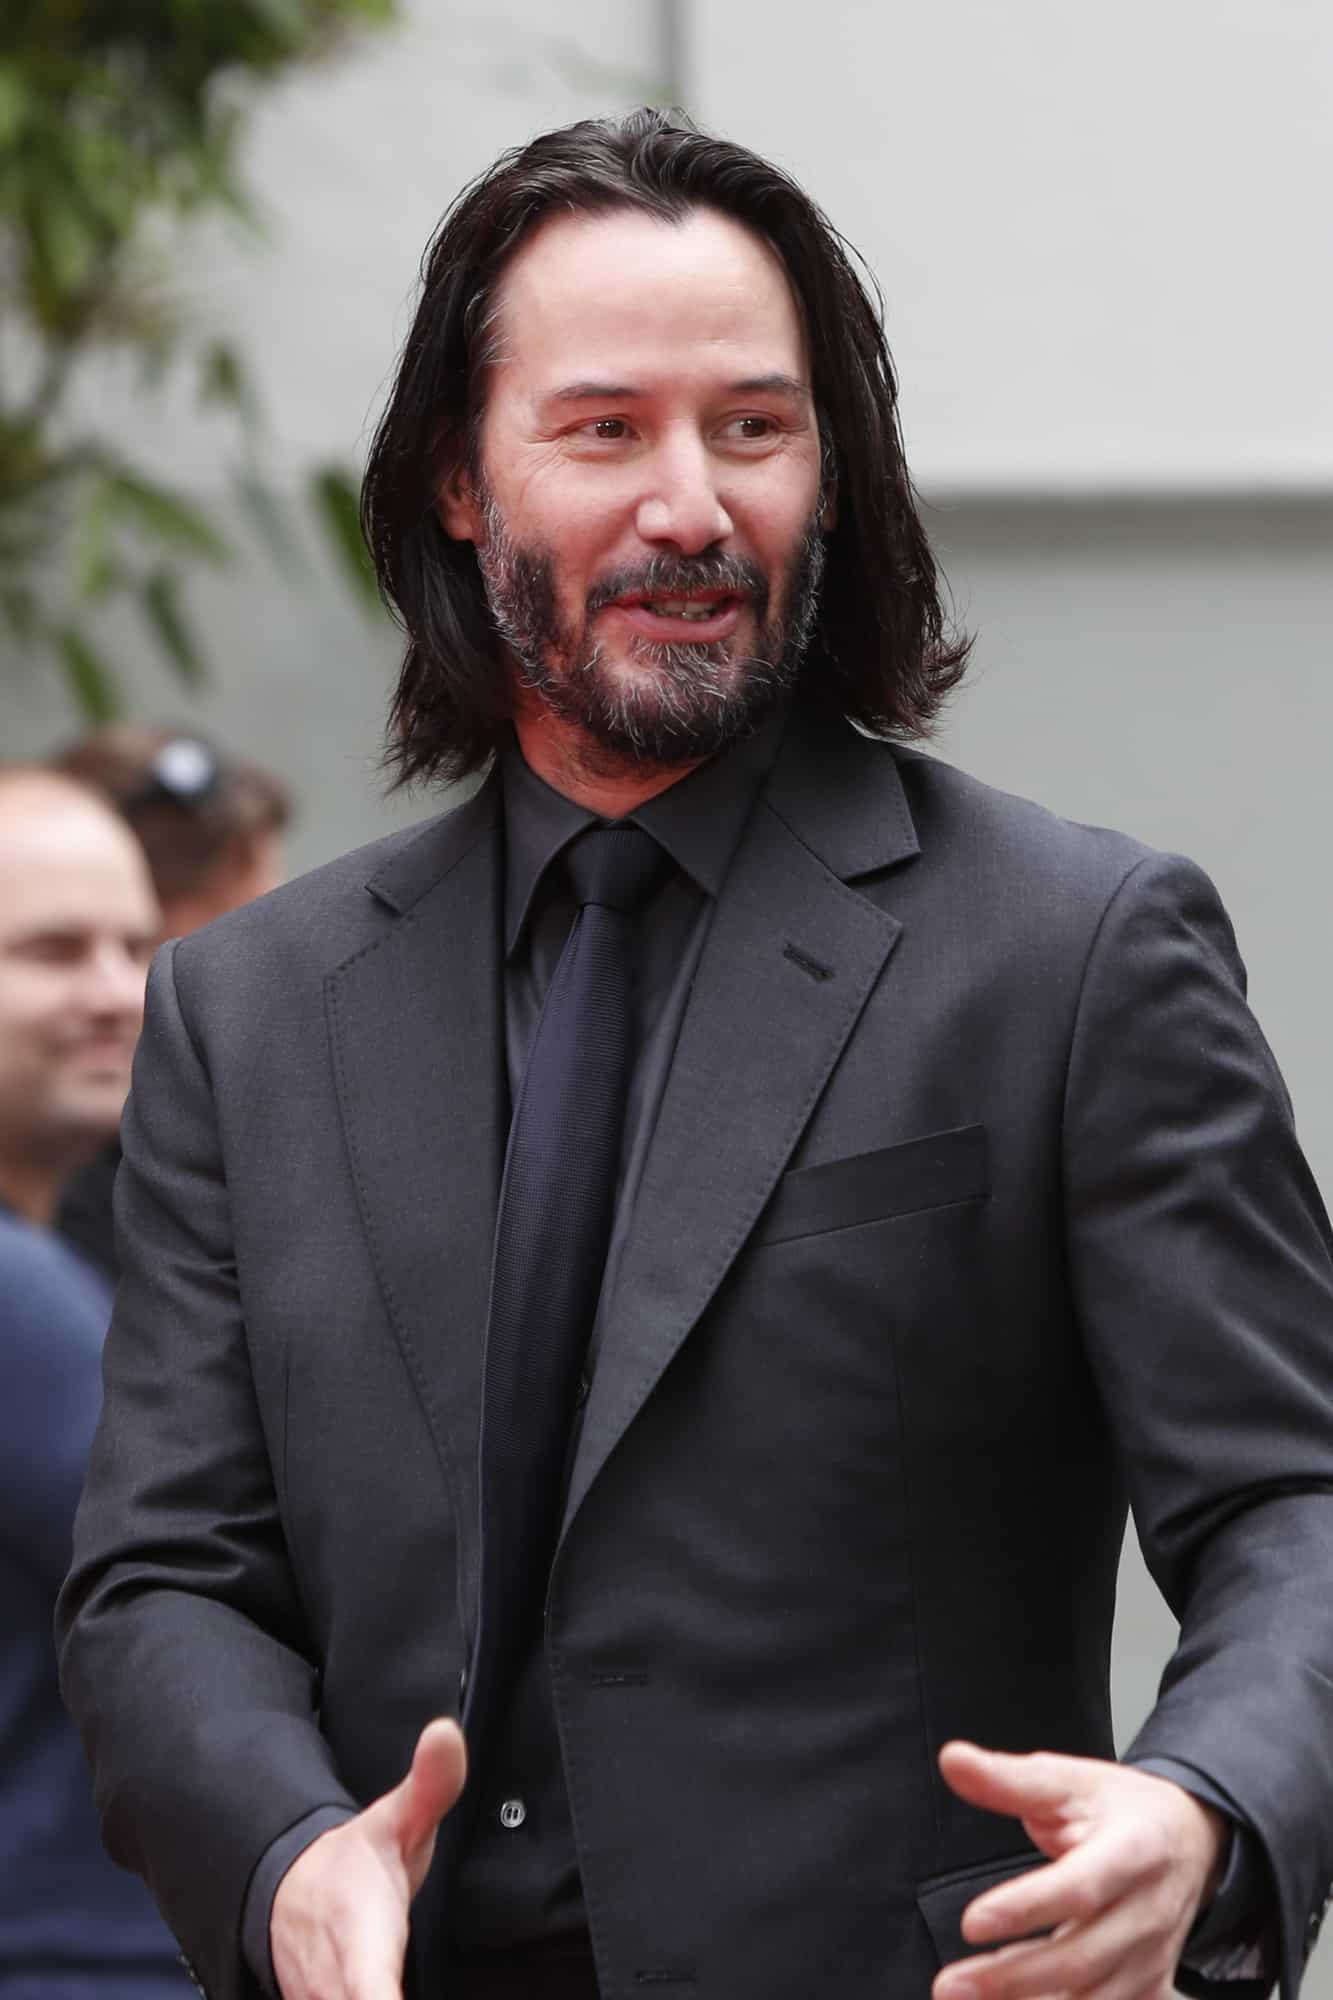 Did You Know Keanu Reeves' John Wick Was Originally Planned To Be A  75-Years Old Actor Likened To Clint Eastwood Or Harrison Ford, Makers Had  To Rework On The Script To Fit